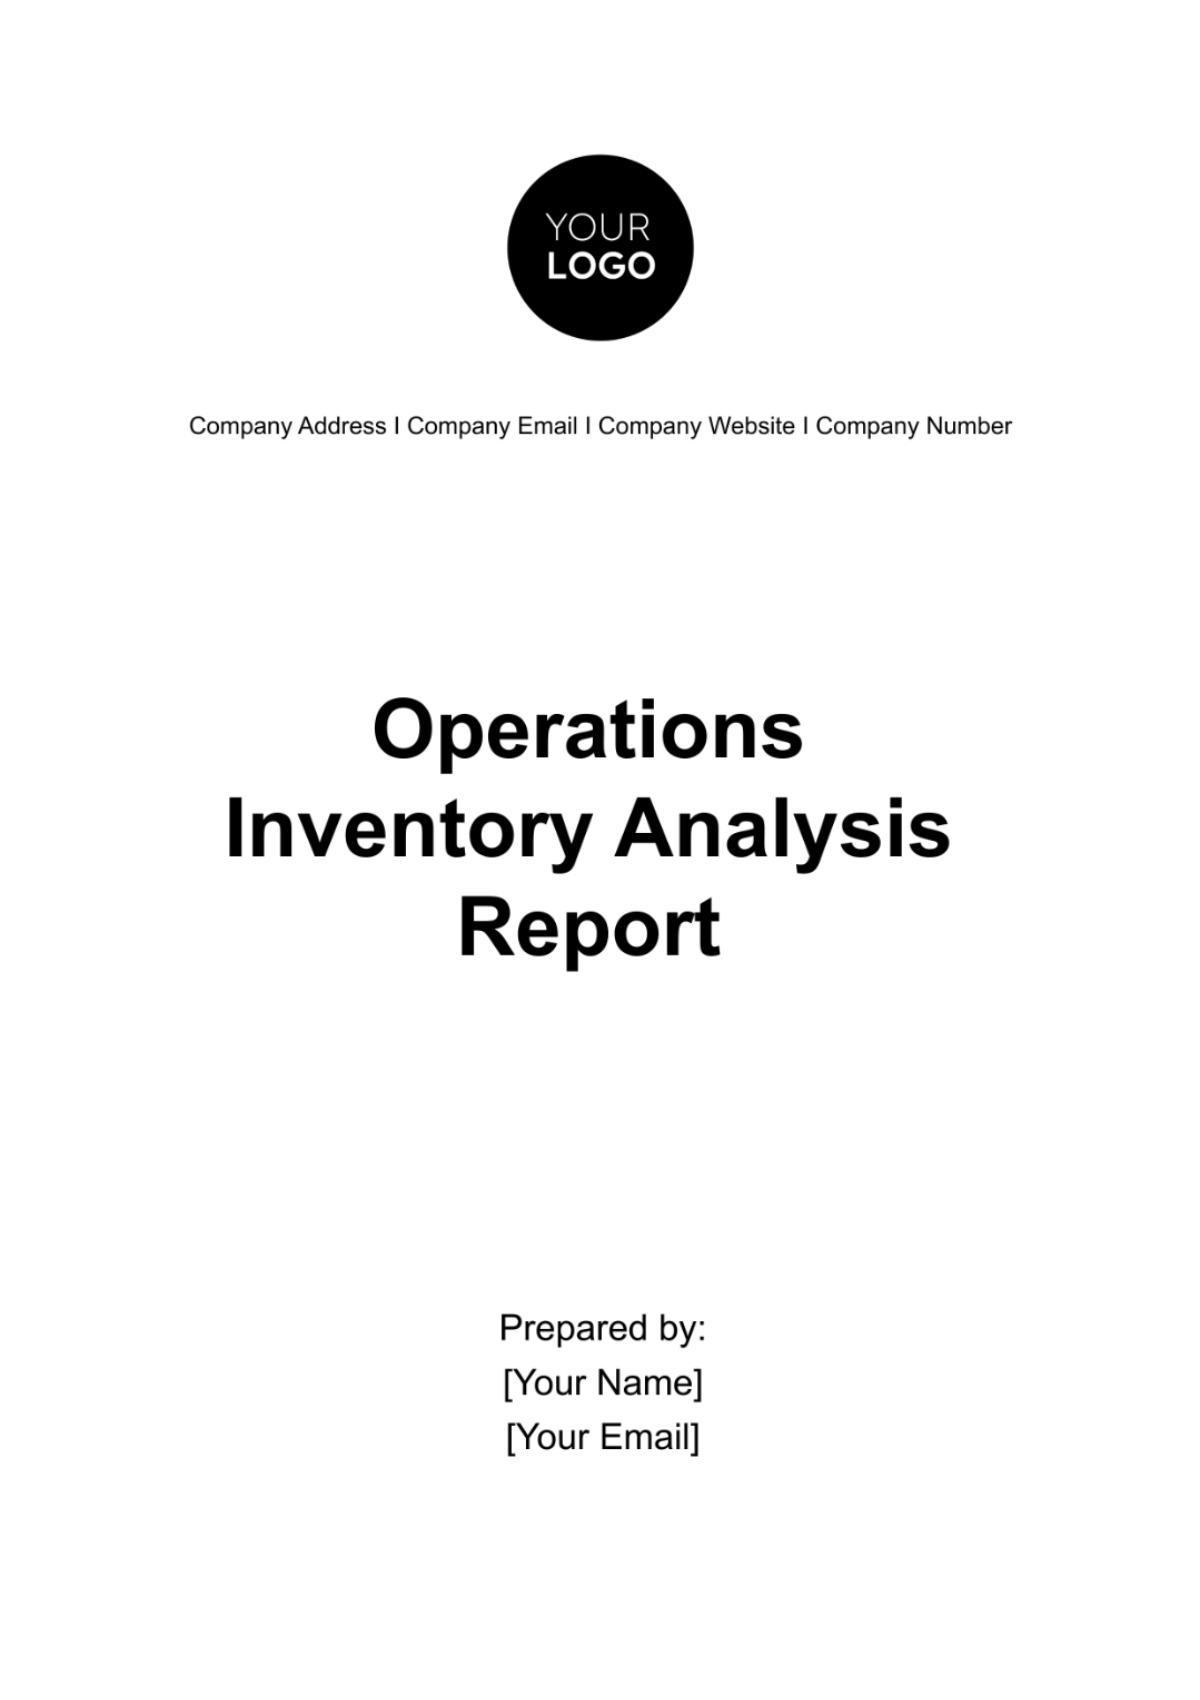 Operations Inventory Analysis Report Template